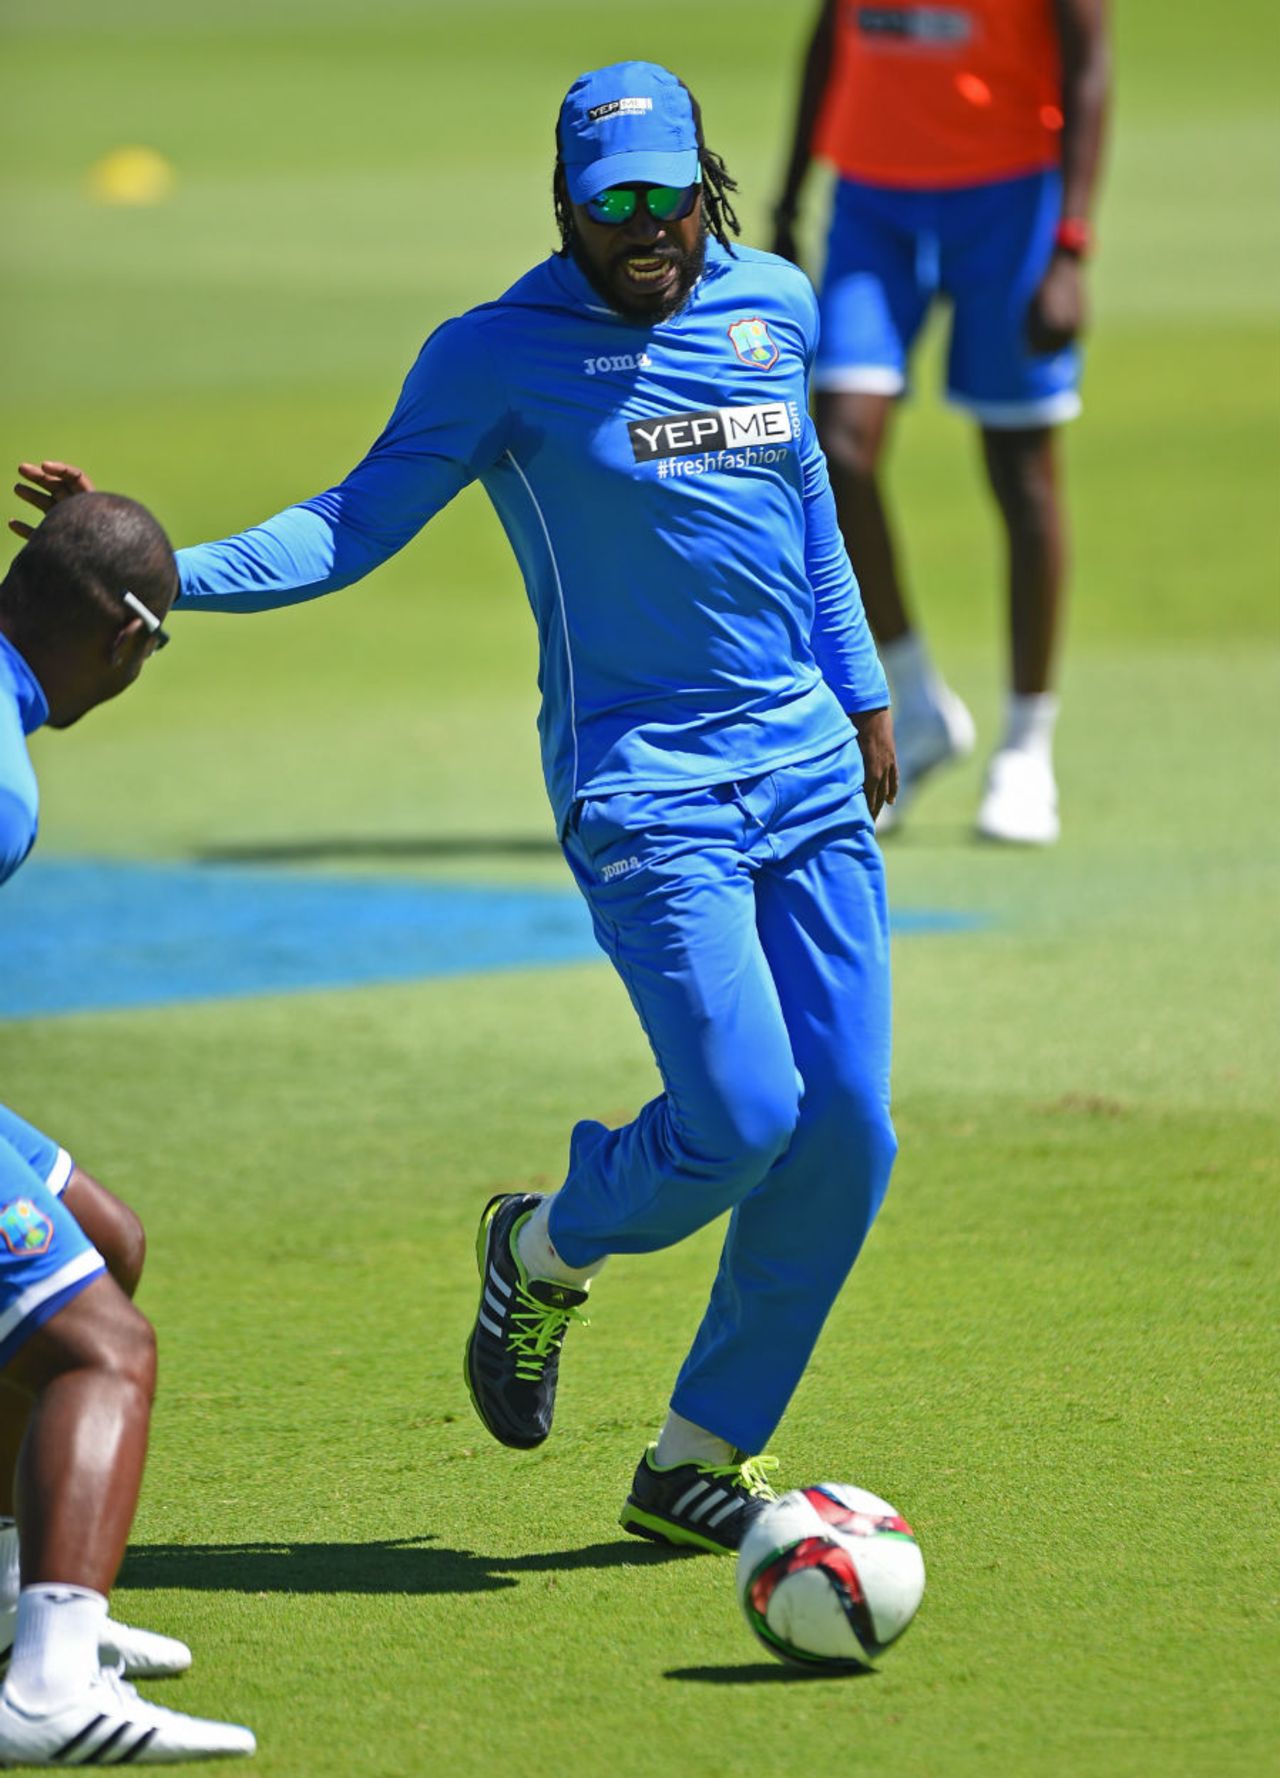 Chris Gayle shows off his football skills, India v West Indies,  World Cup 2015, Group B, Perth, March 5 